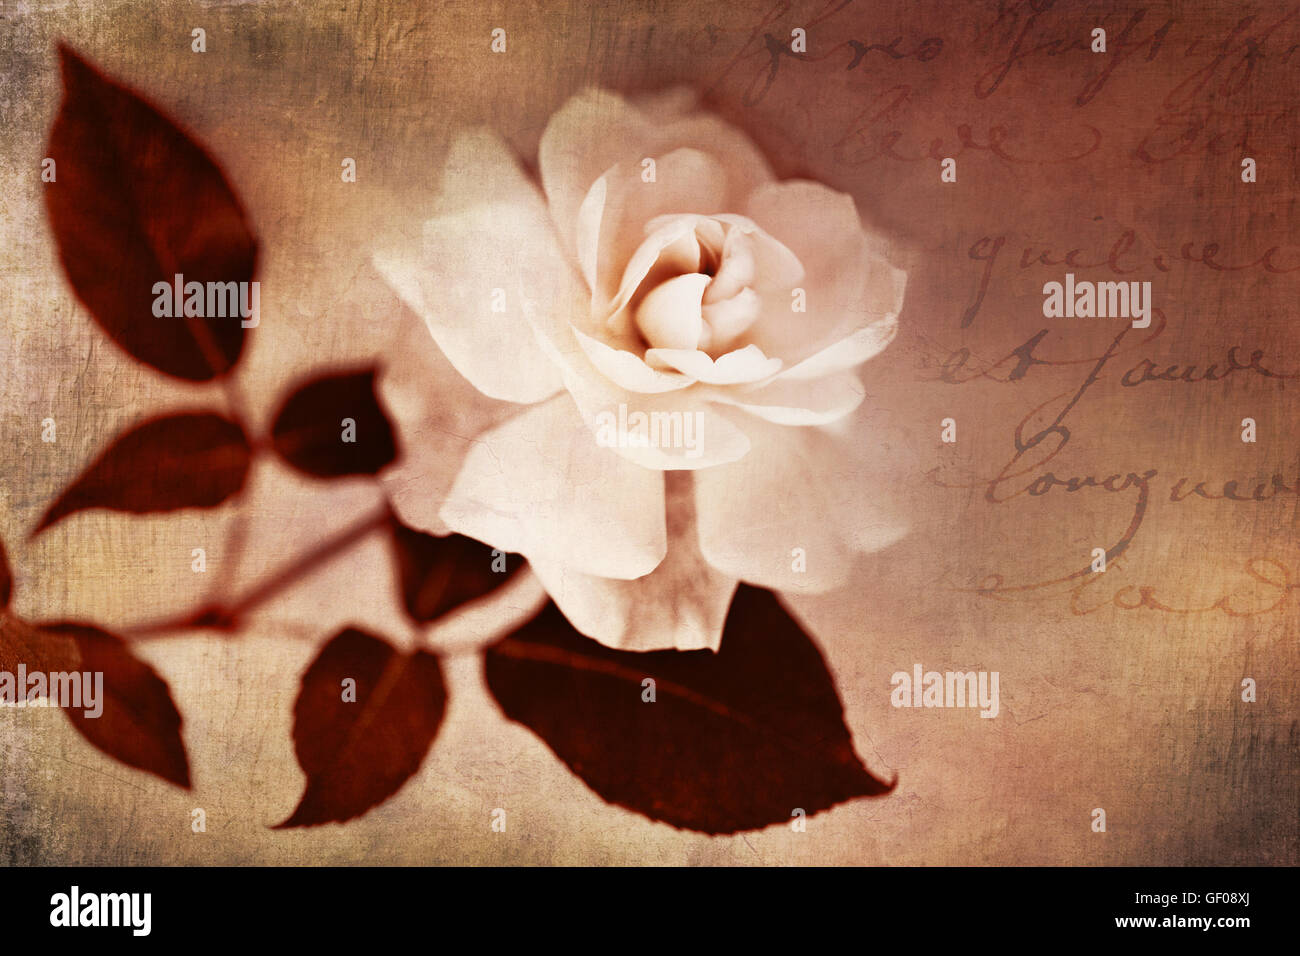 Garden Rose Flower White Sepia Floral with French Text Stock Photo